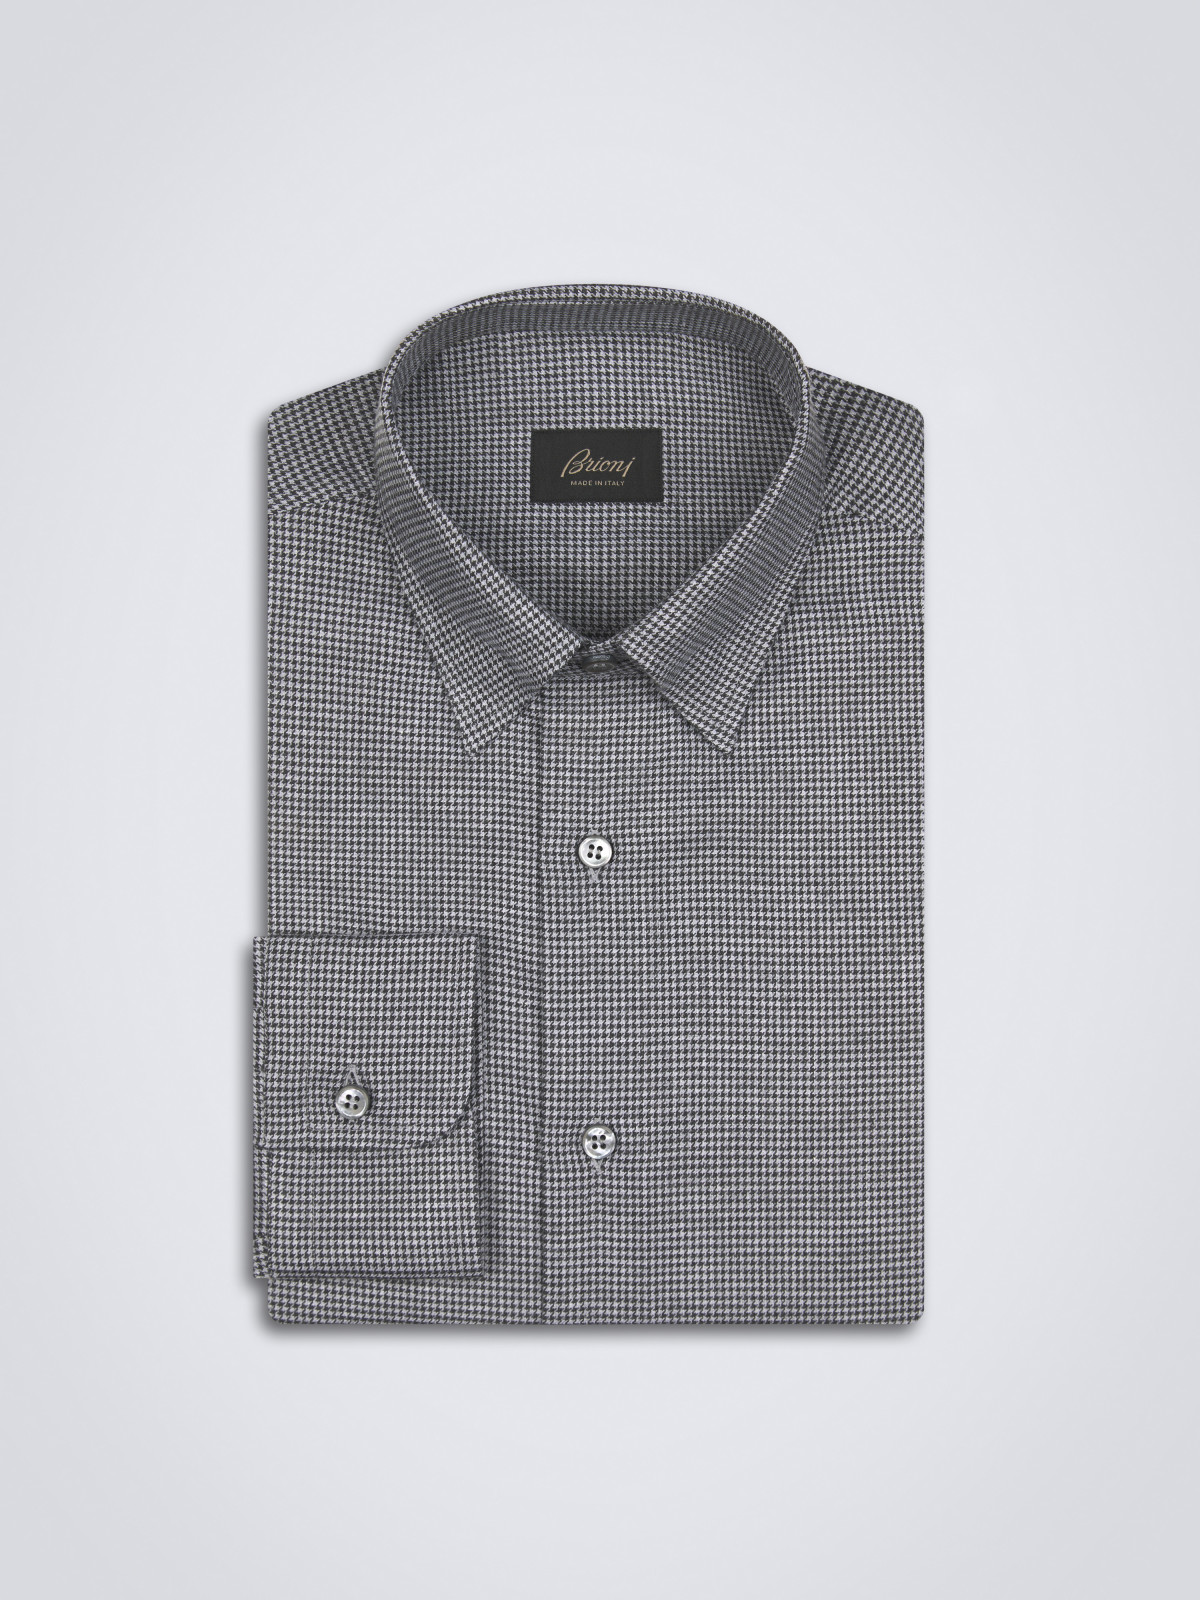 Charcoal and white cotton and cashmere hidden button down shirt ...